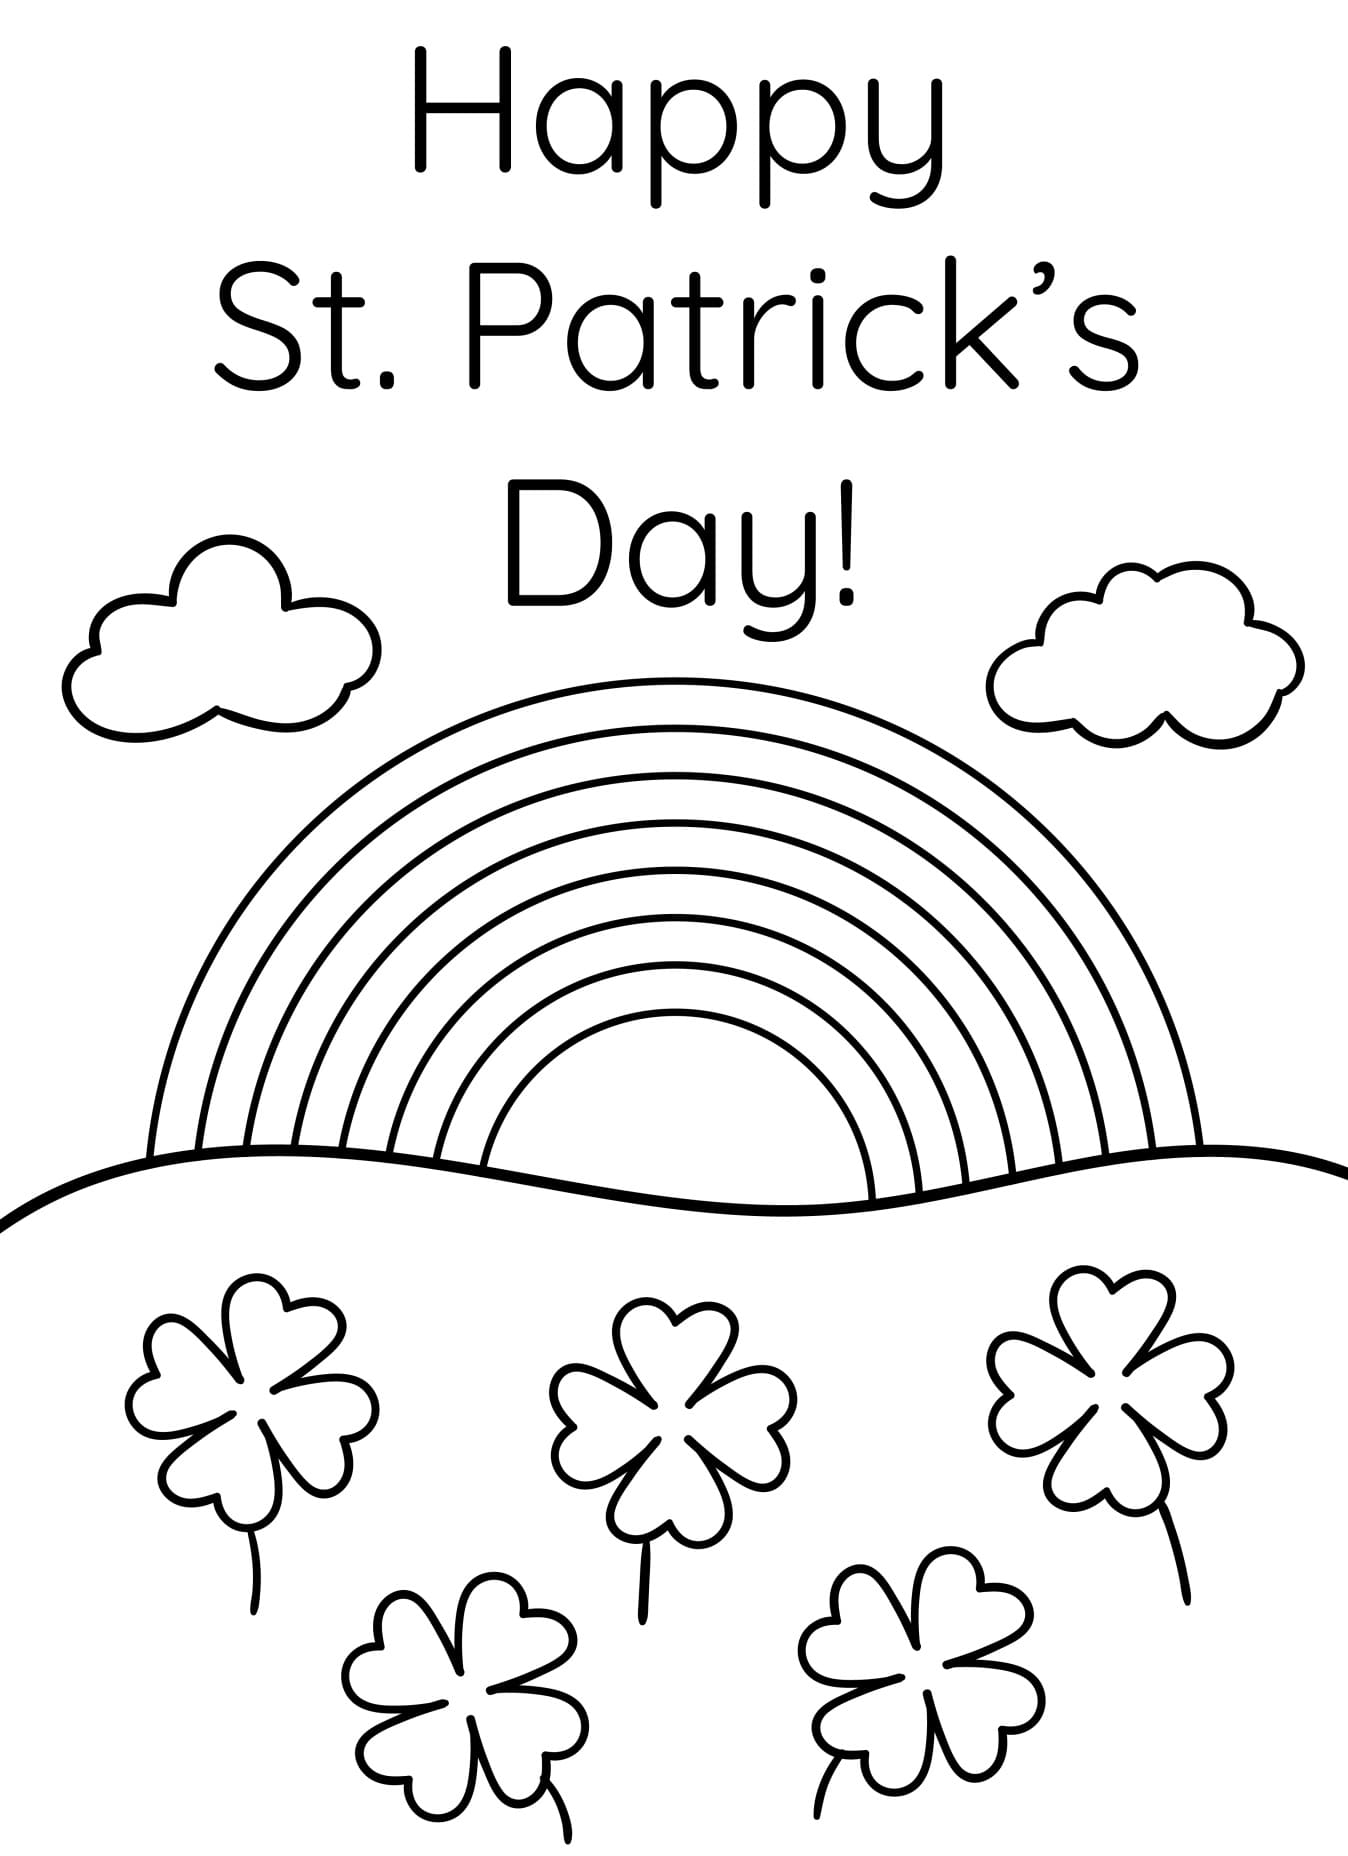 Free Happy St Patrick s Day Coloring Page Free Printable Coloring